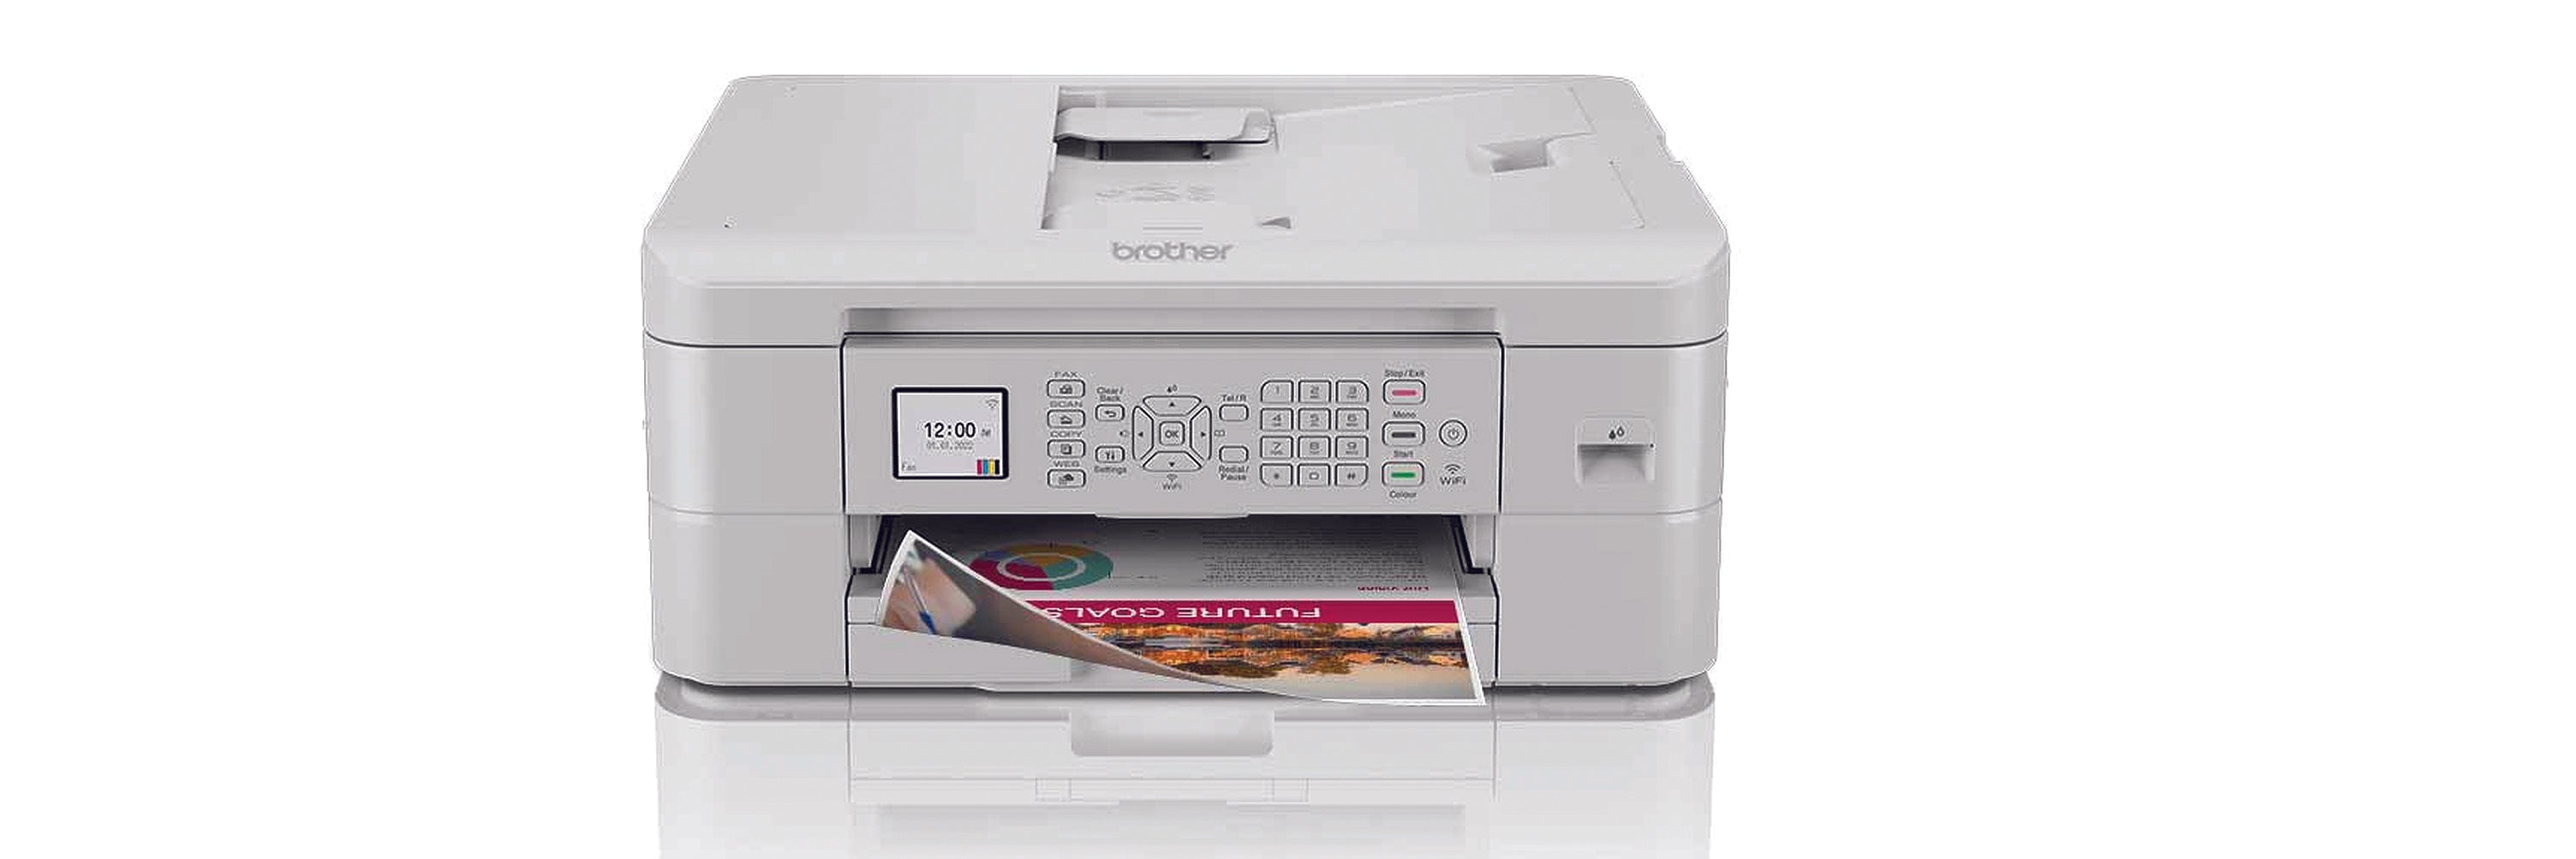 Brother Printer: How to install the driver without a CD-ROM Drive